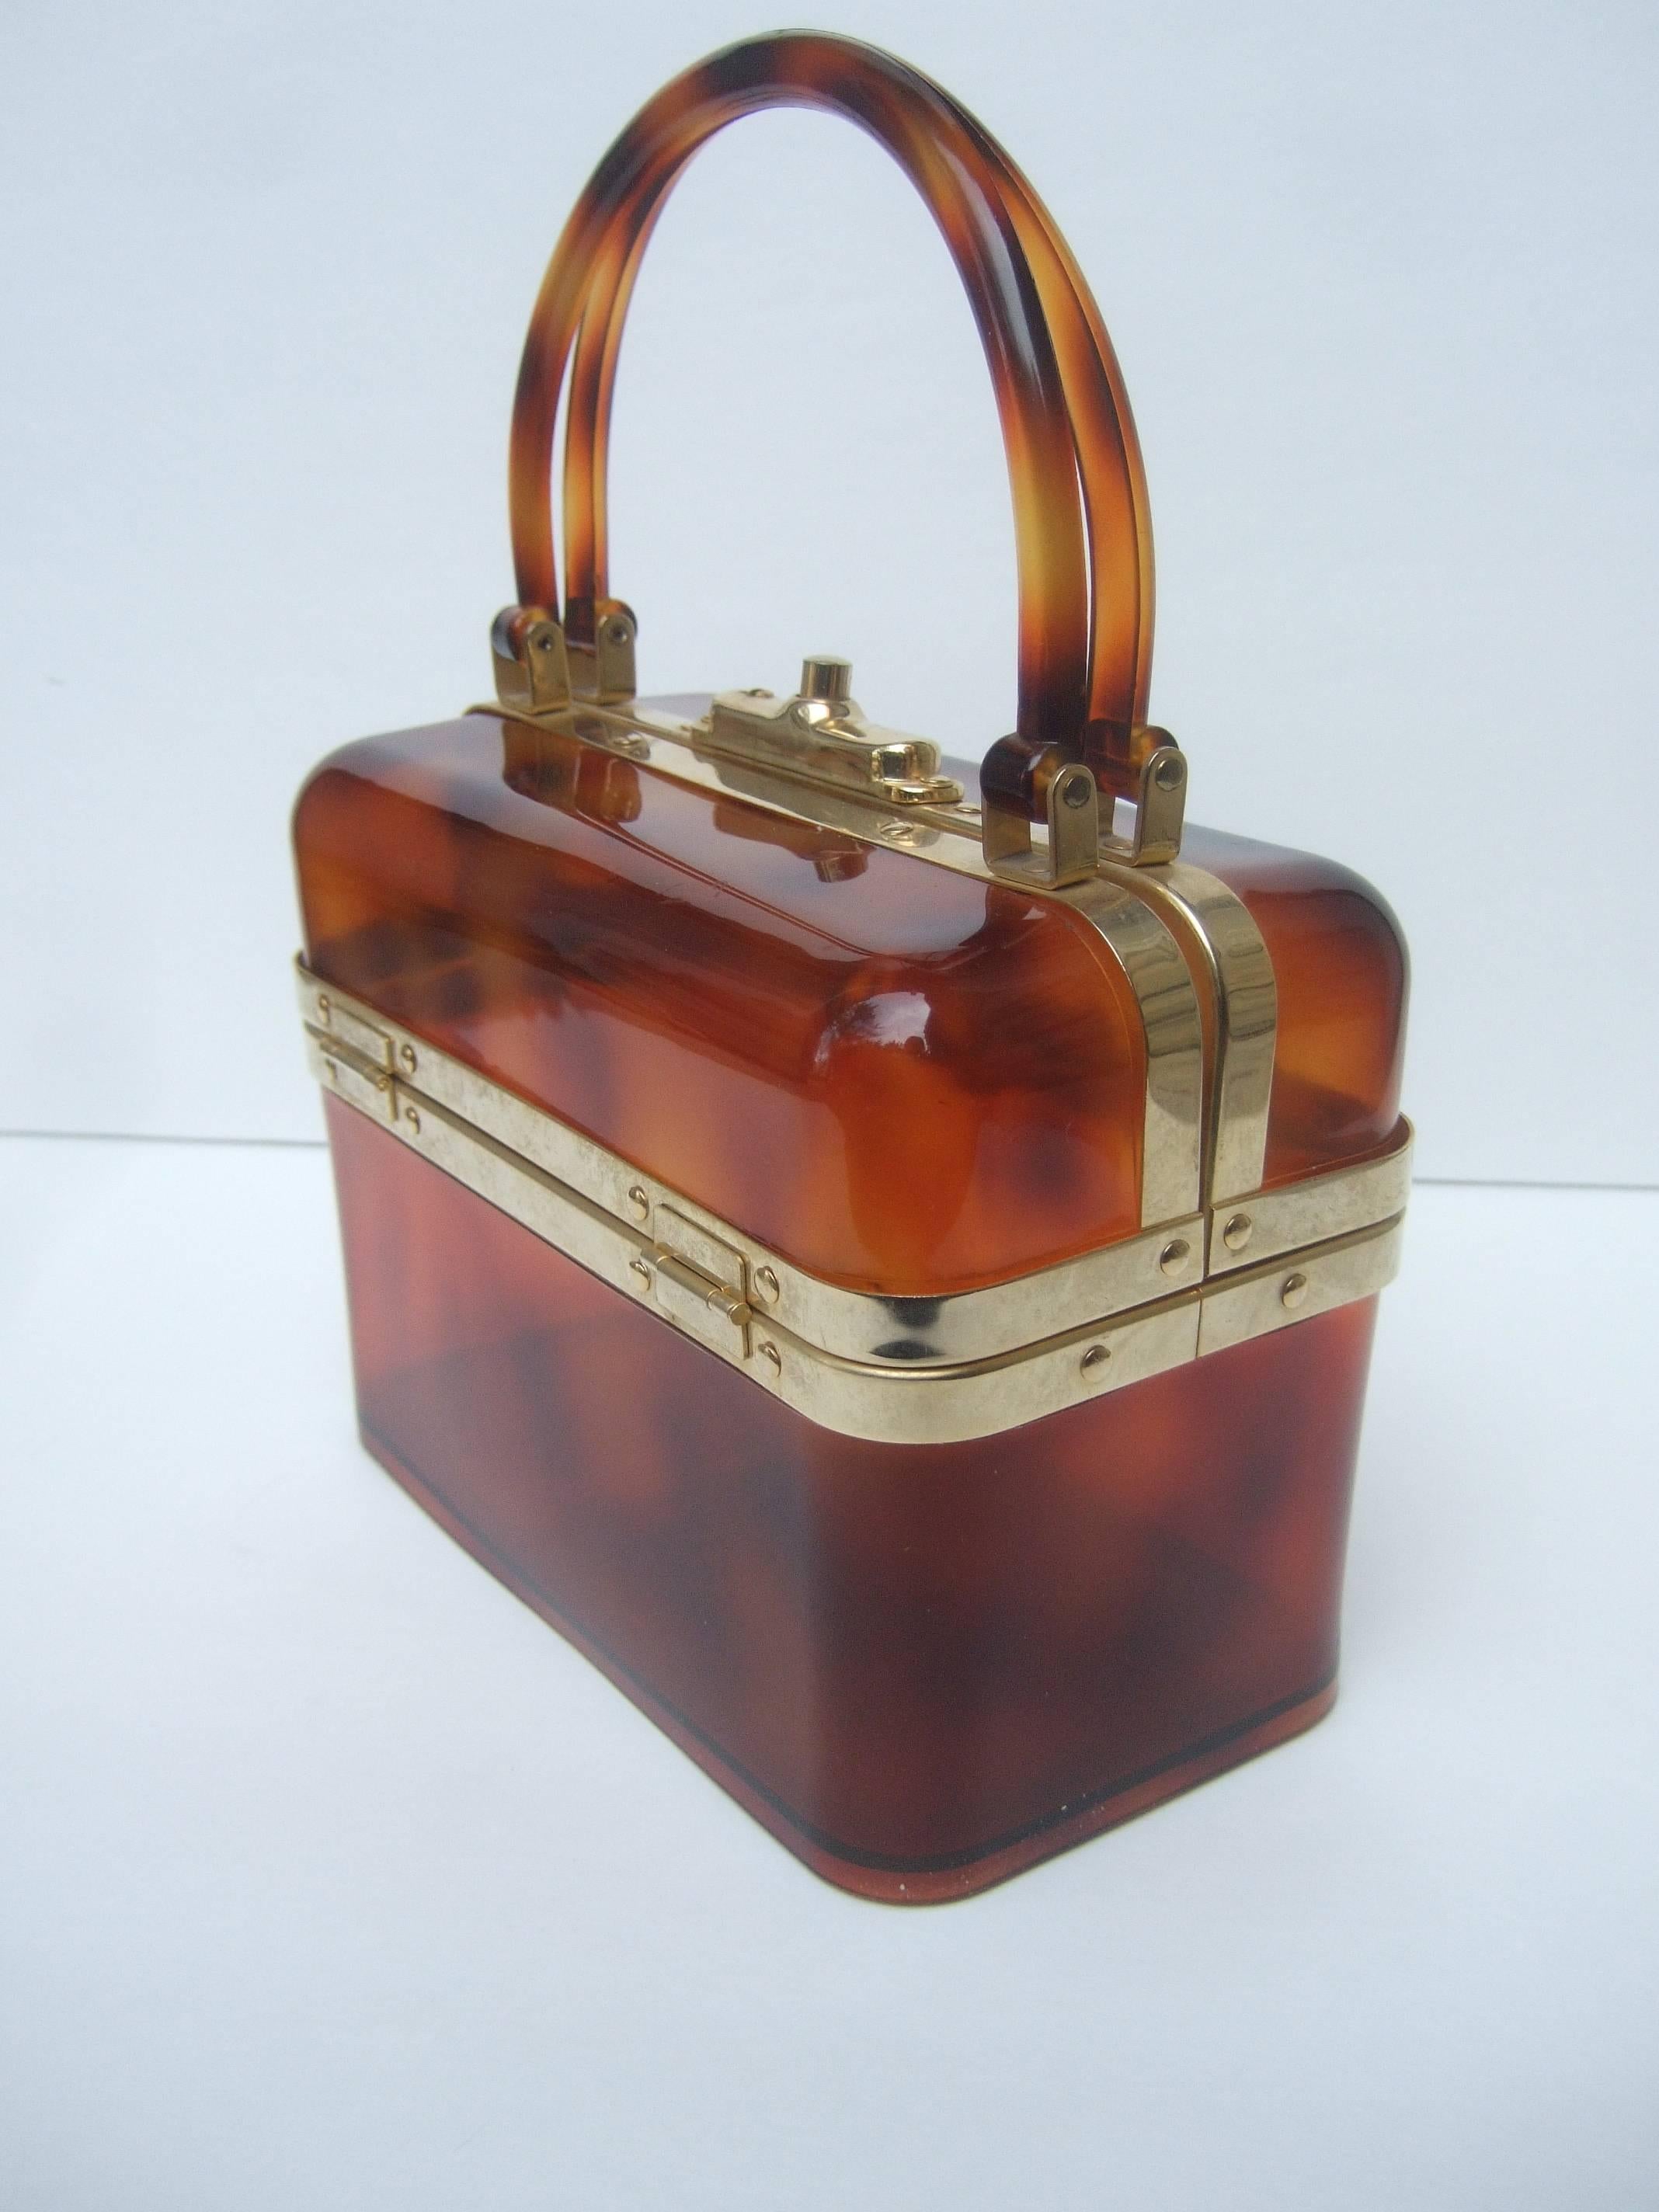 Sleek tortoise shell lucite handbag Made in France c 1970
The stylish retro box shaped handbag is designed
with translucent brown lucite with gilt metal trim
and hardware 

The chic handbag is carried with twin matching 
lucite swivel handles.